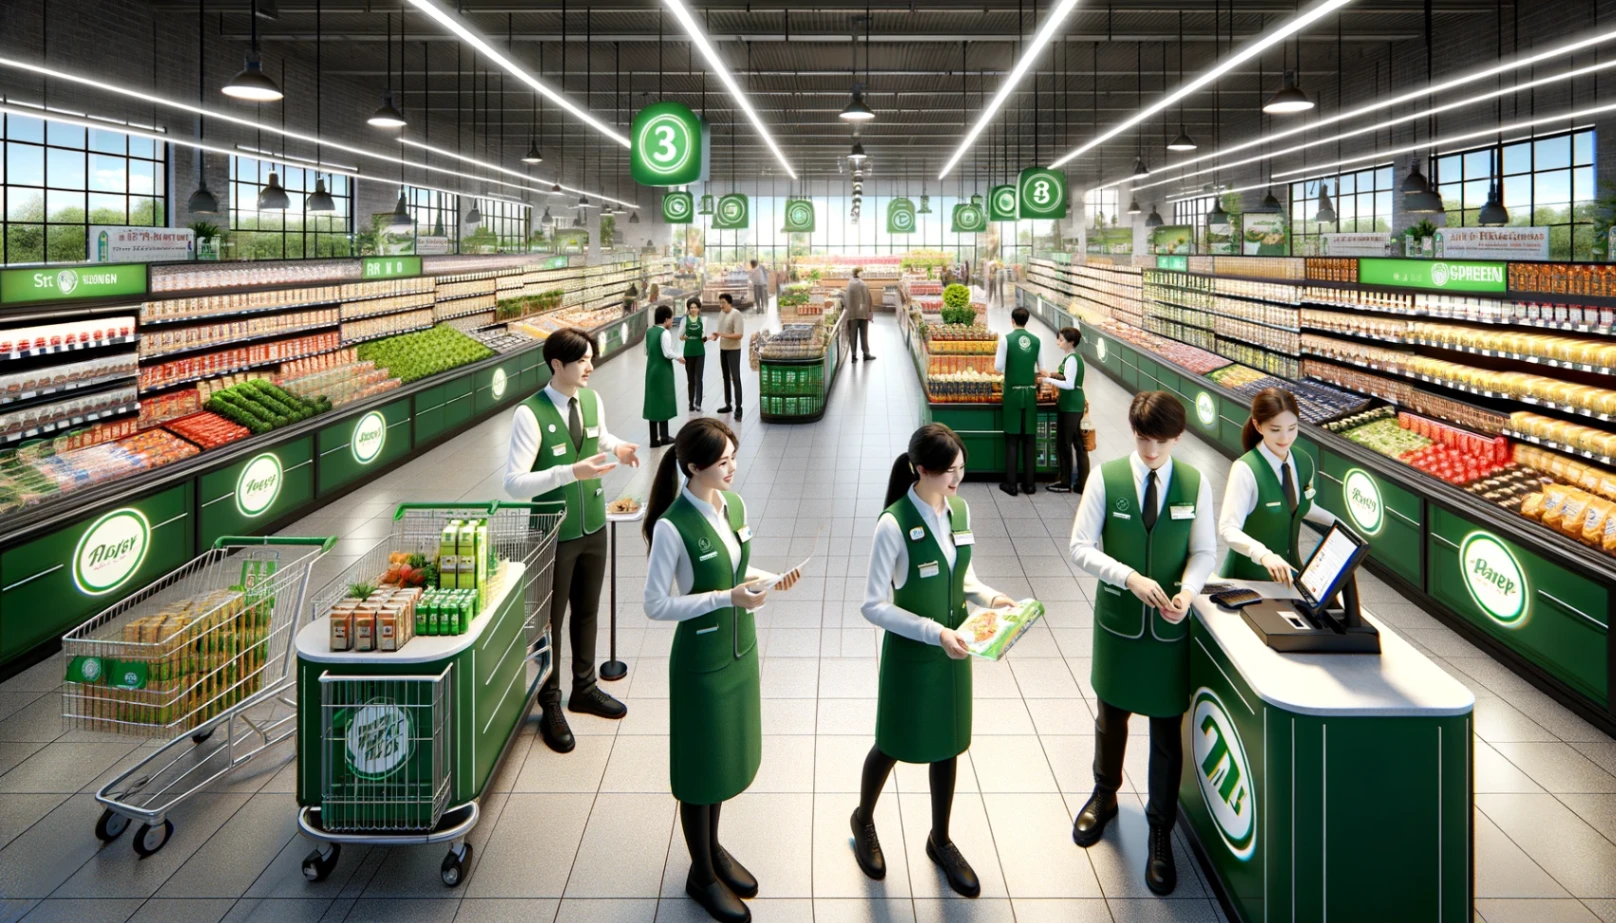 Publix Super Markets Careers: Learn How to Apply